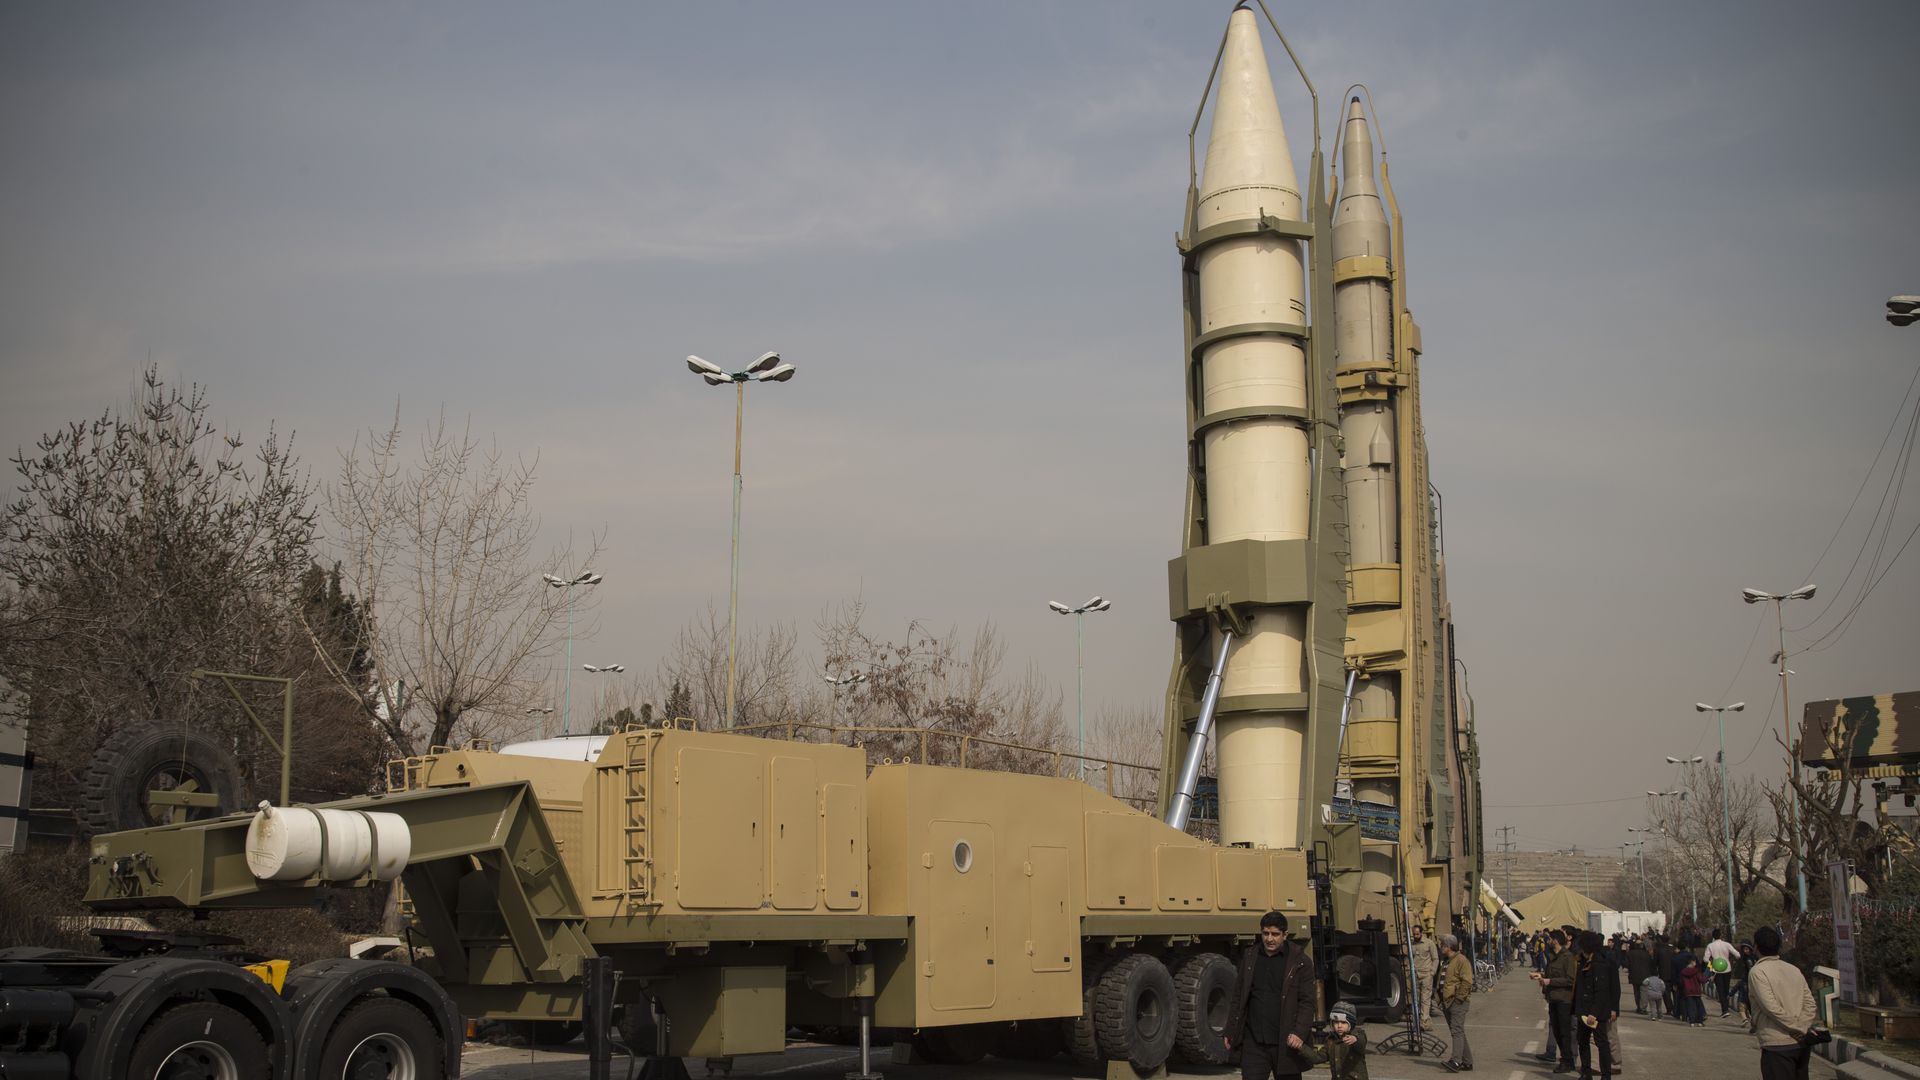 Iranian missiles on display at a military exhibition